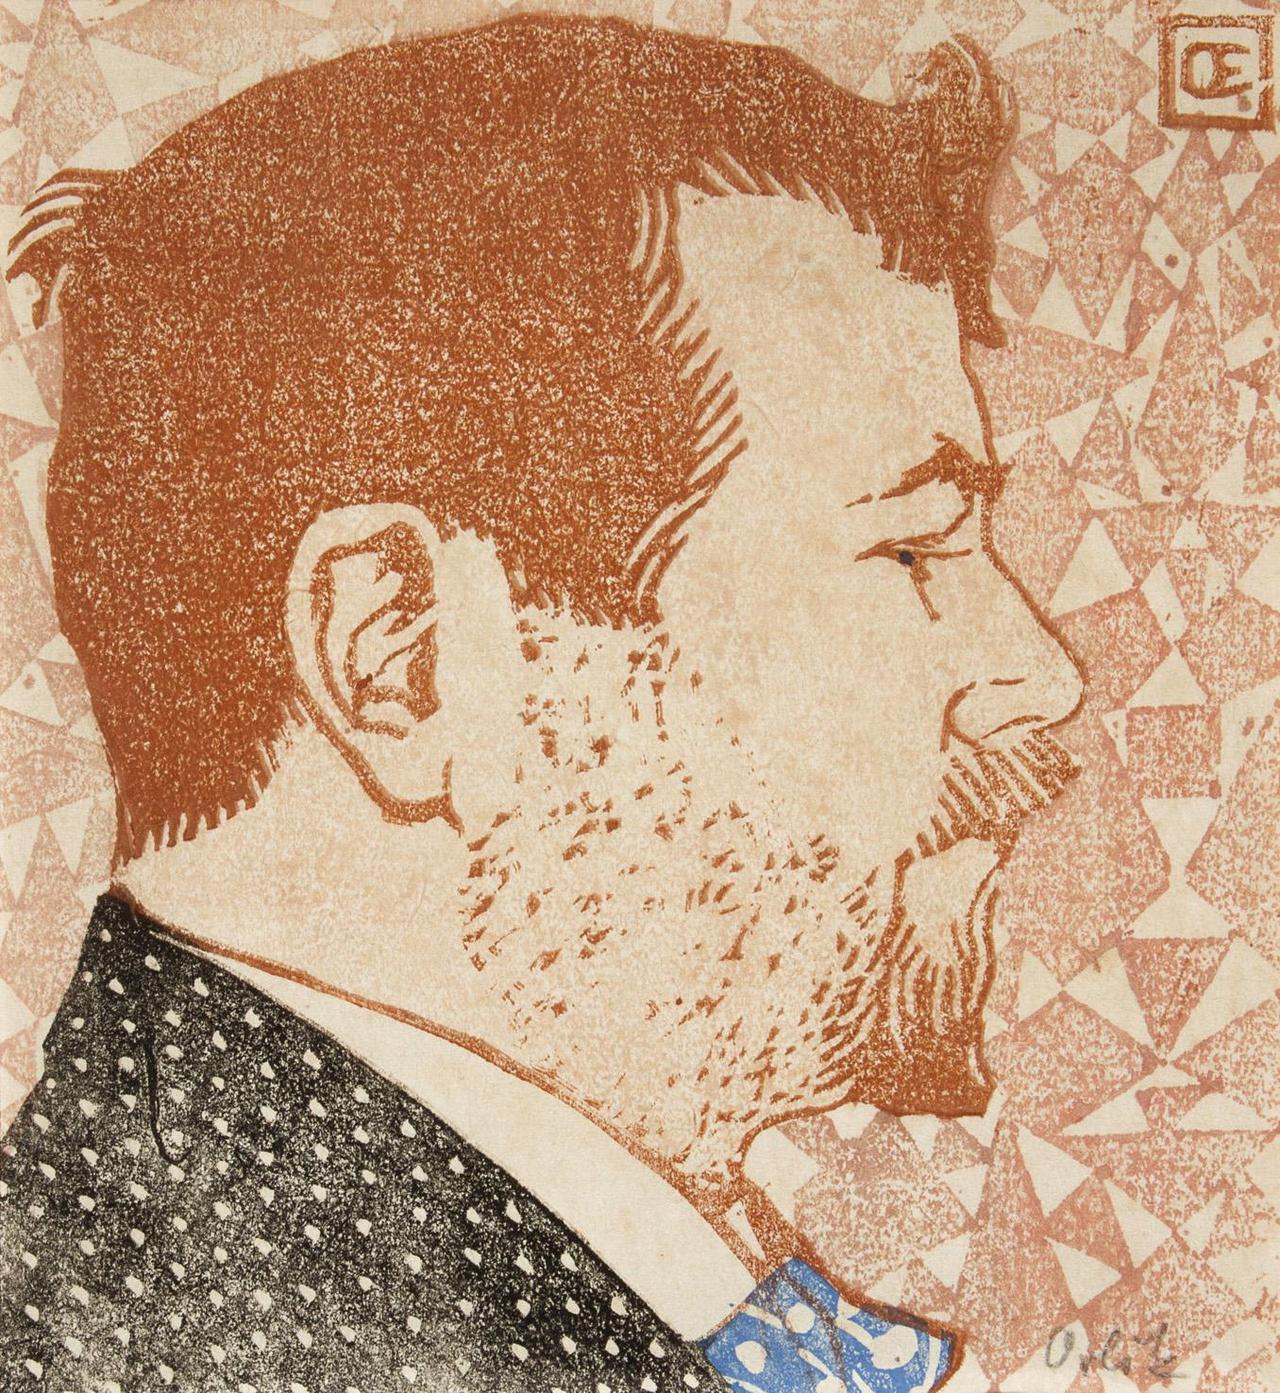 Emil Orlik (Czech, 1870-1932), A
<div class='clear:both;'></div>
<div id='post-wrapper-ads1'>
</div>
</div>
<div style='clear: both;'></div>
<div class='jos-author' style='background-color:#f7f7f7; color:#222; margin-bottom:7px; margin-top:2px; padding:5px 5px 5px'>
<span itemprop='itemreviewed'>Korean Piercings ~
      </span>Rating: <span class='rating' itemprop='rating'><strong>4.7</strong></span>
</div>
</div>
<br/>
<div style='clear: both;'></div>
<div id='related_posts'>
<h3>Artikel Terkait Korean Piercings</h3>
<script src='/feeds/posts/default/-/korean?alt=json-in-script&callback=relpostimgcuplik&max-results=50' type='text/javascript'></script>
<script src='/feeds/posts/default/-/piercings?alt=json-in-script&callback=relpostimgcuplik&max-results=50' type='text/javascript'></script>
<ul id='relpost_img_sum'>
<script type='text/javascript'>artikelterkait();</script>
</ul>
</div>
</div>
<div class='comments' id='comments'>
<a name='comments'></a>
<div id='backlinks-container'>
<div id='Blog1_backlinks-container'>
</div>
</div>
</div>
</div>

        </div></div>
      
<!--Can't find substitution for tag [adEnd]-->
</div>
<div class='blog-pager' id='blog-pager'>
<span id='blog-pager-newer-link'>
<a class='blog-pager-newer-link' href='http://dramatic-makeup.blogspot.com/2015/02/koi-piercings.html' id='Blog1_blog-pager-newer-link' title='Newer Post'>← Newer Post</a>
</span>
<span id='blog-pager-older-link'>
<a class='blog-pager-older-link' href='http://dramatic-makeup.blogspot.com/2015/02/kolo-piercings.html' id='Blog1_blog-pager-older-link' title='Older Post'>Older Post →</a>
</span>
<a class='home-link' href='http://dramatic-makeup.blogspot.com/'>Home</a>
</div>
<div class='clear'></div>
<div class='post-feeds'>
</div>
</div></div>
</aside>
<!-- post wrapper end -->
<!-- sidebar wrapper start -->
<aside id='sidebar-wrapper'>
<div class='sidebar section' id='sidebar'><div class='widget PopularPosts' data-version='1' id='PopularPosts1'>
<h2>Popular Posts</h2>
<div class='widget-content popular-posts'>
<ul>
<li>
<div class='item-content'>
<div class='item-thumbnail'>
<a href='http://dramatic-makeup.blogspot.com/2014/08/skyrim-unpb-bbp-piercings.html' target='_blank'>
<img alt='' border='0' src='https://blogger.googleusercontent.com/img/b/R29vZ2xl/AVvXsEjfKqhJD6j8wy0t7wv48pPwqPel11HZyHXfs7MvAIqsmKh2Z1KL2eosqIAaqsoLS6hqsMUZekufU_uK0MQ5wiPviGkiW-lj5sJAfle94wRCWTKgJCEbFdUI0S1TAynbee0cFpist5SfMg0h/w72-h72-p-k-no-nu/2013-12-18_00020.jpg'/>
</a>
</div>
<div class='item-title'><a href='http://dramatic-makeup.blogspot.com/2014/08/skyrim-unpb-bbp-piercings.html'>Skyrim Unpb Bbp Piercings</a></div>
<div class='item-snippet'>skyrim unpb bbp piercings  – Find the newest extraordinary kitchen design ideas especially some topics related to skyrim unpb bbp piercings ...</div>
</div>
<div style='clear: both;'></div>
</li>
<li>
<div class='item-content'>
<div class='item-thumbnail'>
<a href='http://dramatic-makeup.blogspot.com/2014/10/elaine-davidson-genital-piercings_29.html' target='_blank'>
<img alt='' border='0' src='https://blogger.googleusercontent.com/img/b/R29vZ2xl/AVvXsEhnKrAdQ789-Jp2NMvCi_MCH54jjyPfLXhy7yo5o47kgf25XSUXZqbyWCez2lF06ERKUnxqjU97VQ9CGXjsvXEo8uGVLAU45BIlJhlUK2p0Szr2RZE9ZL4j_J-NARbstXfozq-GUrKpPDs/w72-h72-p-k-no-nu/DD7.jpg'/>
</a>
</div>
<div class='item-title'><a href='http://dramatic-makeup.blogspot.com/2014/10/elaine-davidson-genital-piercings_29.html'>Elaine Davidson Genital Piercings Pictures</a></div>
<div class='item-snippet'>elaine davidson genital piercings pictures  – Find the newest extraordinary kitchen design ideas especially some topics related to elaine da...</div>
</div>
<div style='clear: both;'></div>
</li>
<li>
<div class='item-content'>
<div class='item-thumbnail'>
<a href='http://dramatic-makeup.blogspot.com/2014/10/emma-watson-piercings.html' target='_blank'>
<img alt='' border='0' src='https://blogger.googleusercontent.com/img/b/R29vZ2xl/AVvXsEgKVfLLB6CxAs4q7ksztuDPxzKSJKQvaQrW1HSEwy0QmyoXRU_oCyW90xOaWtr28O3zJpyPnJ6ZNwsUJ7N_N6dIV-c3hoOKY-CLYA1uZvEuwKCEe4KBvEmnUxjGeAbZ-ZthNY8owlI8qMiA/w72-h72-p-k-no-nu/emma-watson-harry-potter-premiere.jpg'/>
</a>
</div>
<div class='item-title'><a href='http://dramatic-makeup.blogspot.com/2014/10/emma-watson-piercings.html'>Emma Watson Piercings</a></div>
<div class='item-snippet'>emma watson piercings  – Find the newest extraordinary kitchen design ideas especially some topics related to emma watson piercings only in ...</div>
</div>
<div style='clear: both;'></div>
</li>
<li>
<div class='item-content'>
<div class='item-thumbnail'>
<a href='http://dramatic-makeup.blogspot.com/2014/08/body-piercings-pictures-female.html' target='_blank'>
<img alt='' border='0' src='http://4.bp.blogspot.com/-SImb0en53mE/Tnz09V4RX4I/AAAAAAAAAAk/XHV5K7fwdWE/w72-h72-p-k-no-nu/belly+button+piercing1.jpg'/>
</a>
</div>
<div class='item-title'><a href='http://dramatic-makeup.blogspot.com/2014/08/body-piercings-pictures-female.html'>Body Piercings Pictures Female</a></div>
<div class='item-snippet'>body piercings pictures female  photos and pictures collection that posted here was carefully selected and uploaded by Rockymage team after ...</div>
</div>
<div style='clear: both;'></div>
</li>
<li>
<div class='item-content'>
<div class='item-thumbnail'>
<a href='http://dramatic-makeup.blogspot.com/2014/09/cheek-piercings.html' target='_blank'>
<img alt='' border='0' src='https://blogger.googleusercontent.com/img/b/R29vZ2xl/AVvXsEj2e6Y-XrX85YuIMFUNi9tiqeS0feePq0th1KqeEUUzPfEG_O6CwAYcqDiCok9XmRnvY7dPBrj_gLGlPlsPj9fSzGd_uCXzV_YI4blc0uKnv2DF5VcWUVHoJgl-Fa6R6KK15L0gQTsSg1o/w72-h72-p-k-no-nu/P1040102.JPG'/>
</a>
</div>
<div class='item-title'><a href='http://dramatic-makeup.blogspot.com/2014/09/cheek-piercings.html'>Cheek Piercings</a></div>
<div class='item-snippet'>cheek piercings  photos and pictures collection that posted here was carefully selected and uploaded by Rockymage team after choosing the on...</div>
</div>
<div style='clear: both;'></div>
</li>
</ul>
<div class='clear'></div>
</div>
</div><div class='widget HTML' data-version='1' id='HTML2'>
<div class='widget-content'>
<!-- Histats.com  START (hidden counter)-->
<script type=